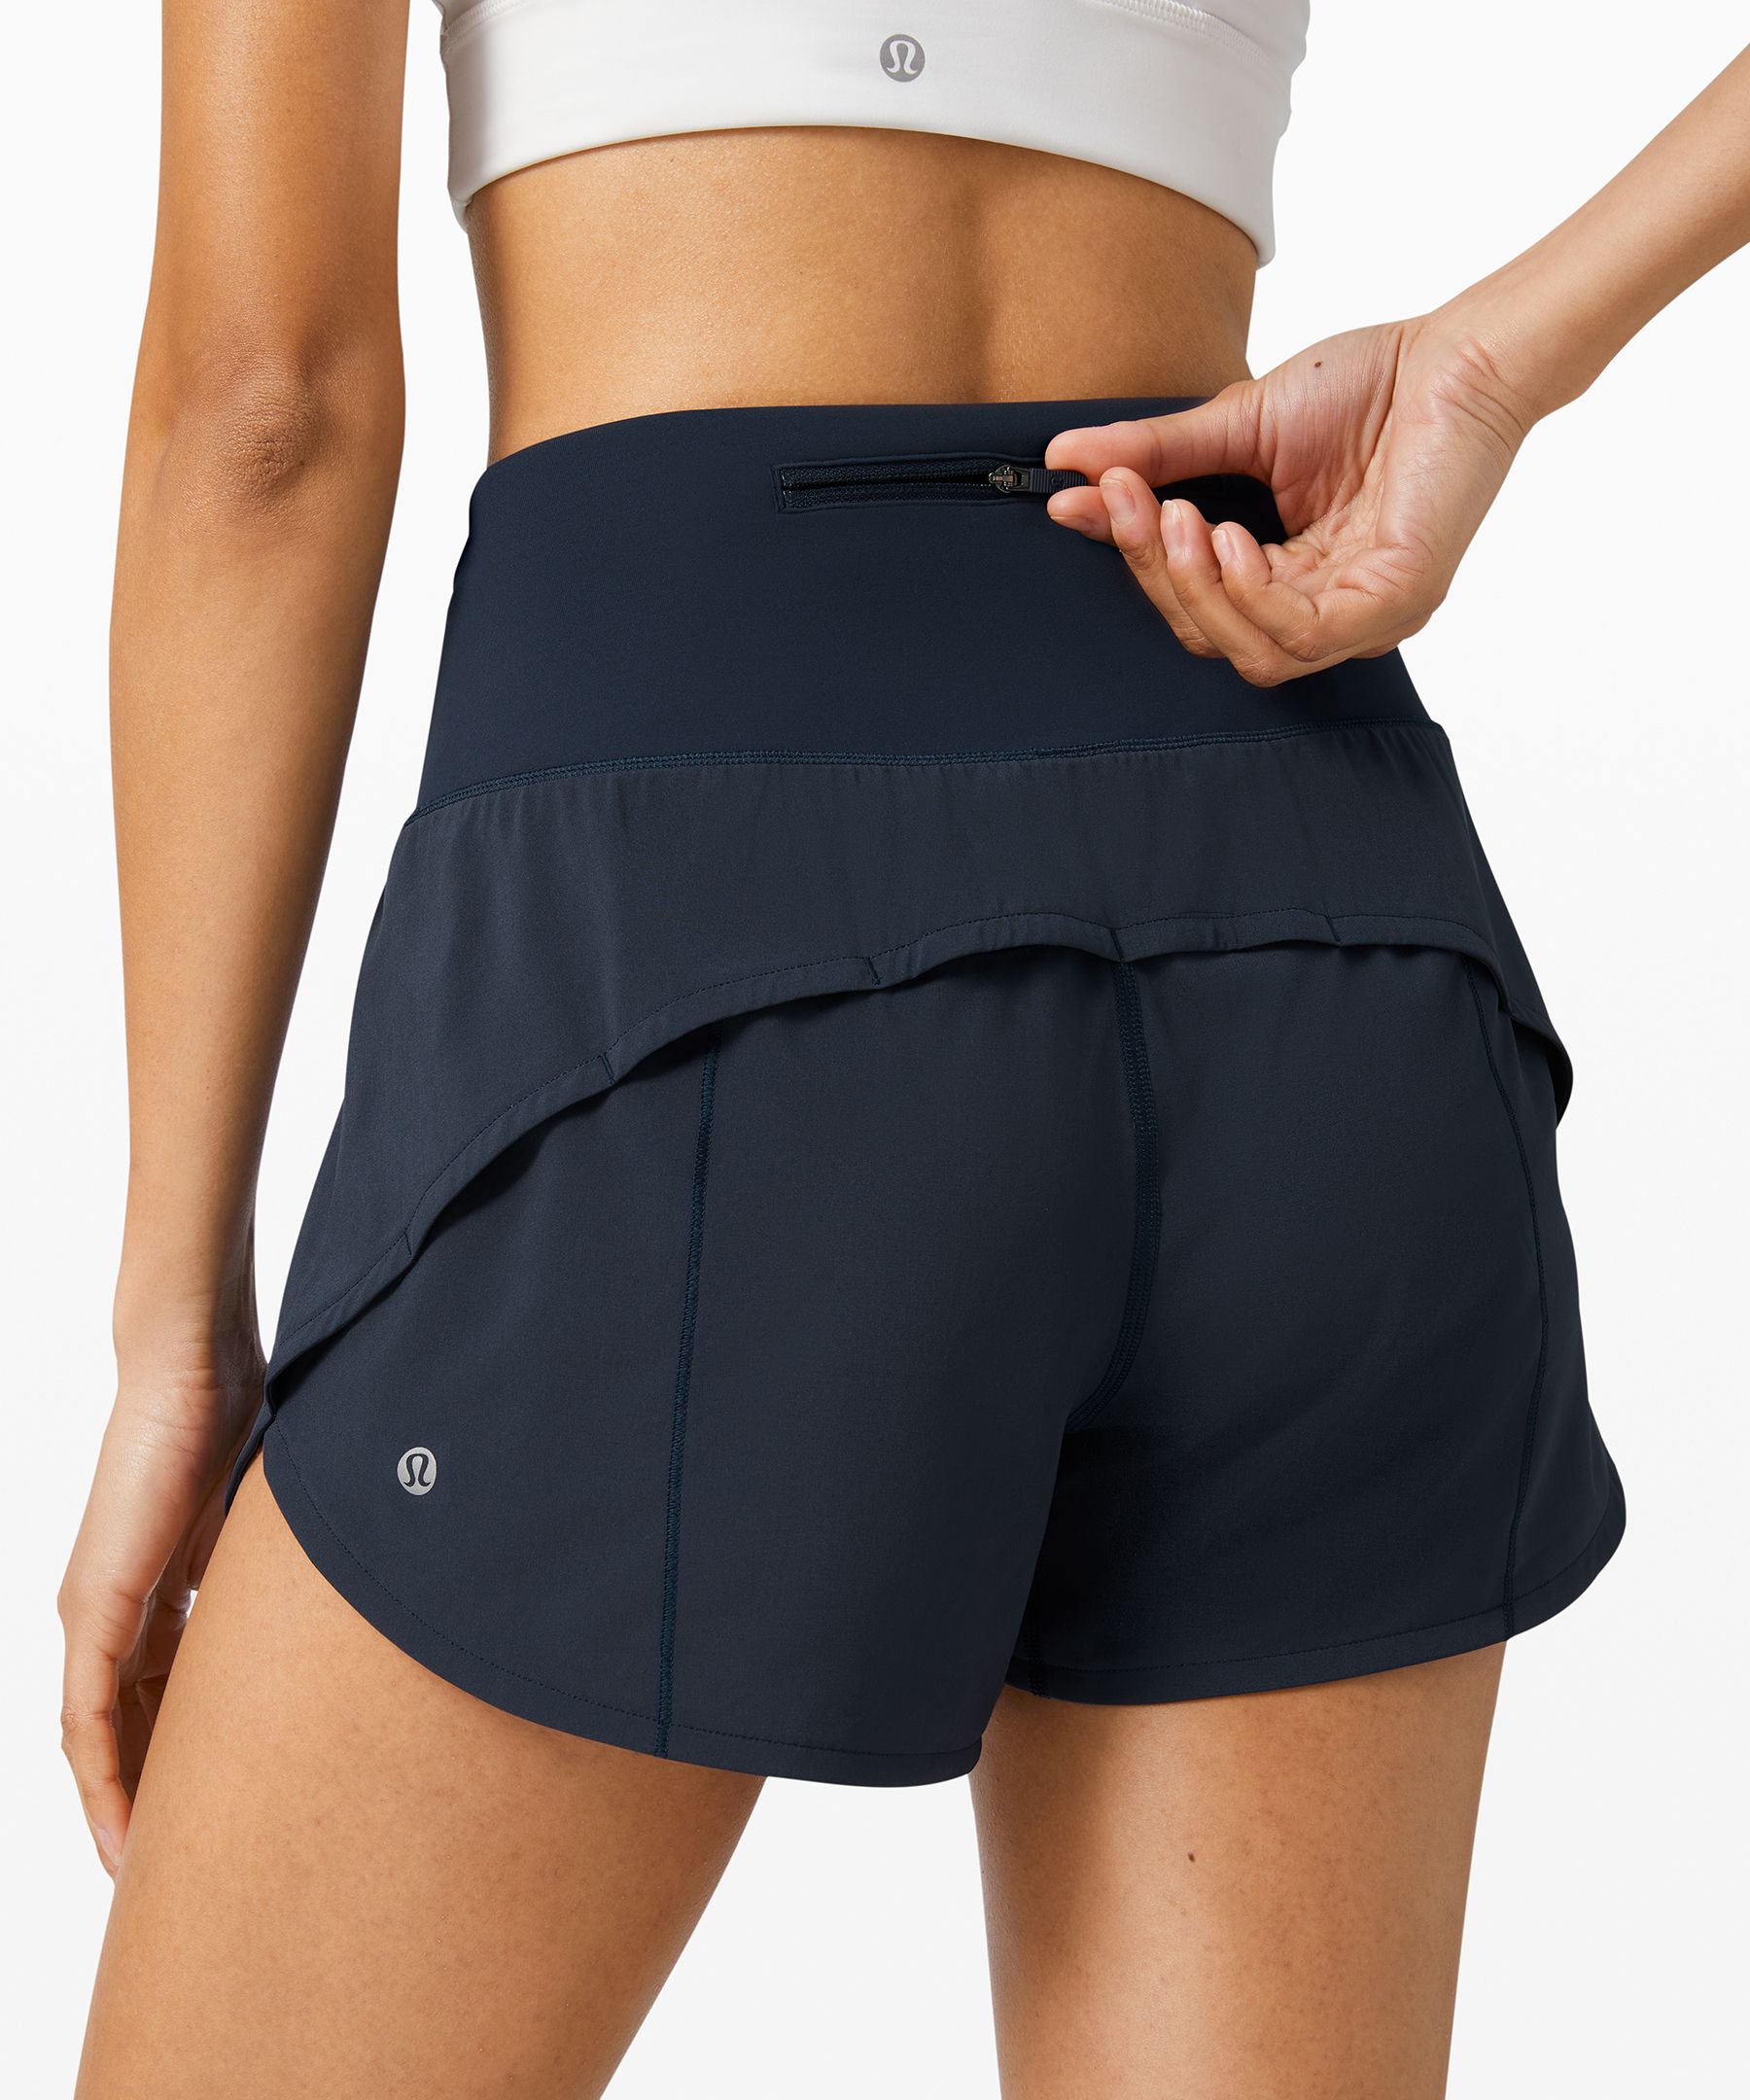 Lululemon Speed Up Shorts 4” Black Size 6 - $20 (59% Off Retail) - From  Katie